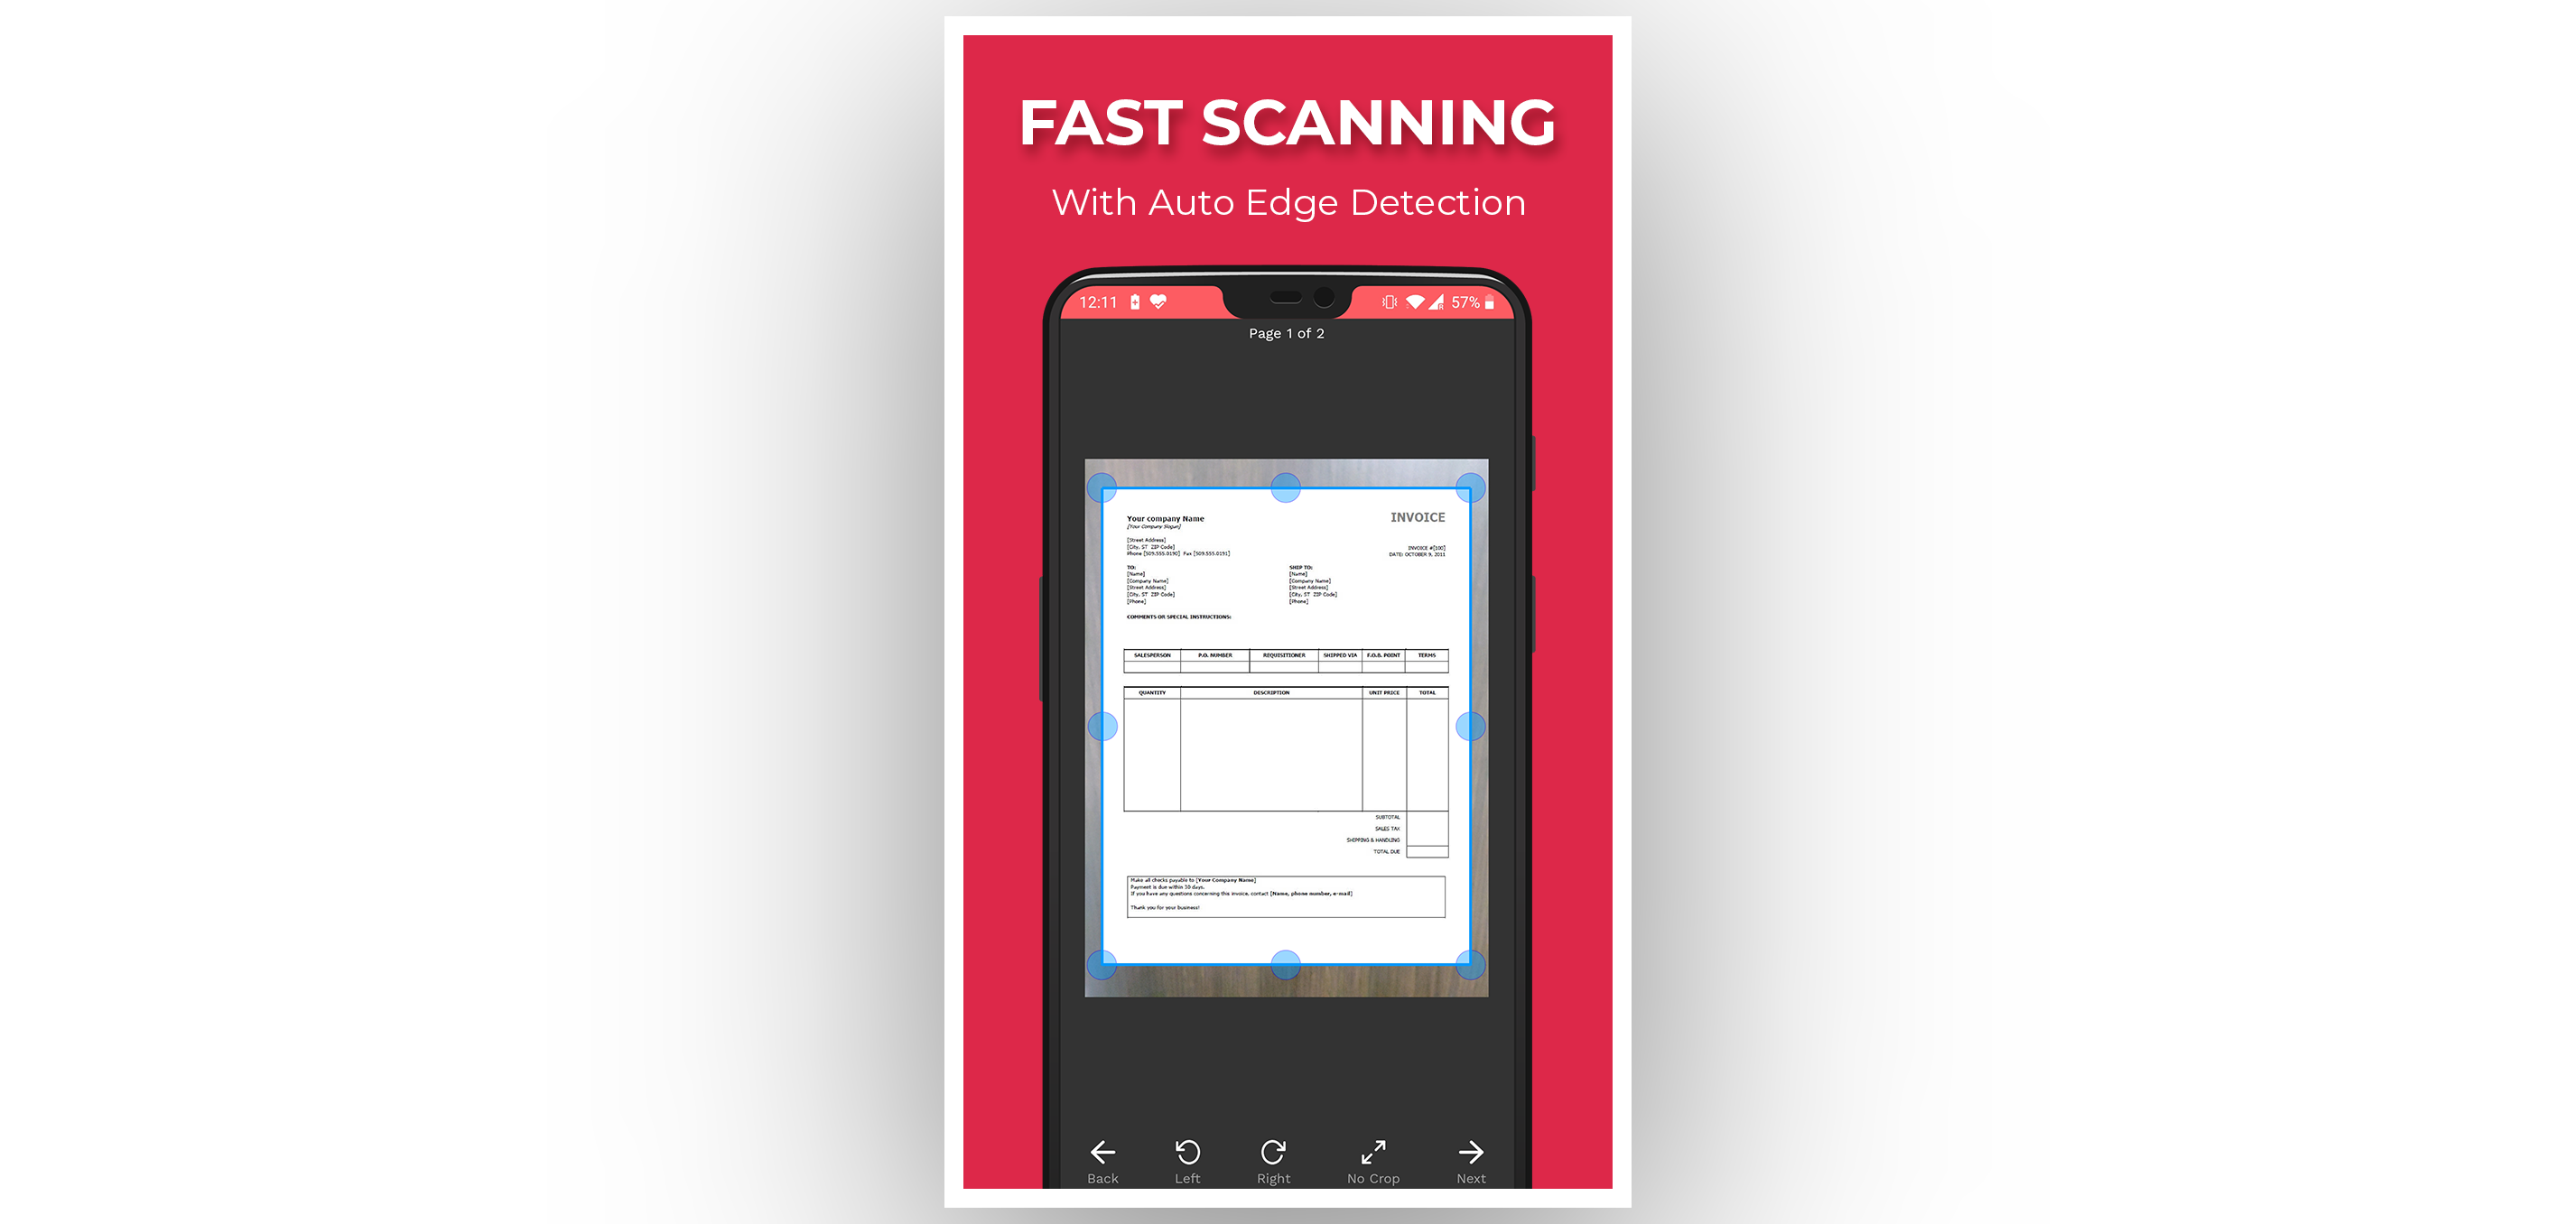 Find pricing, reviews and other details about Kaagaz Scanner